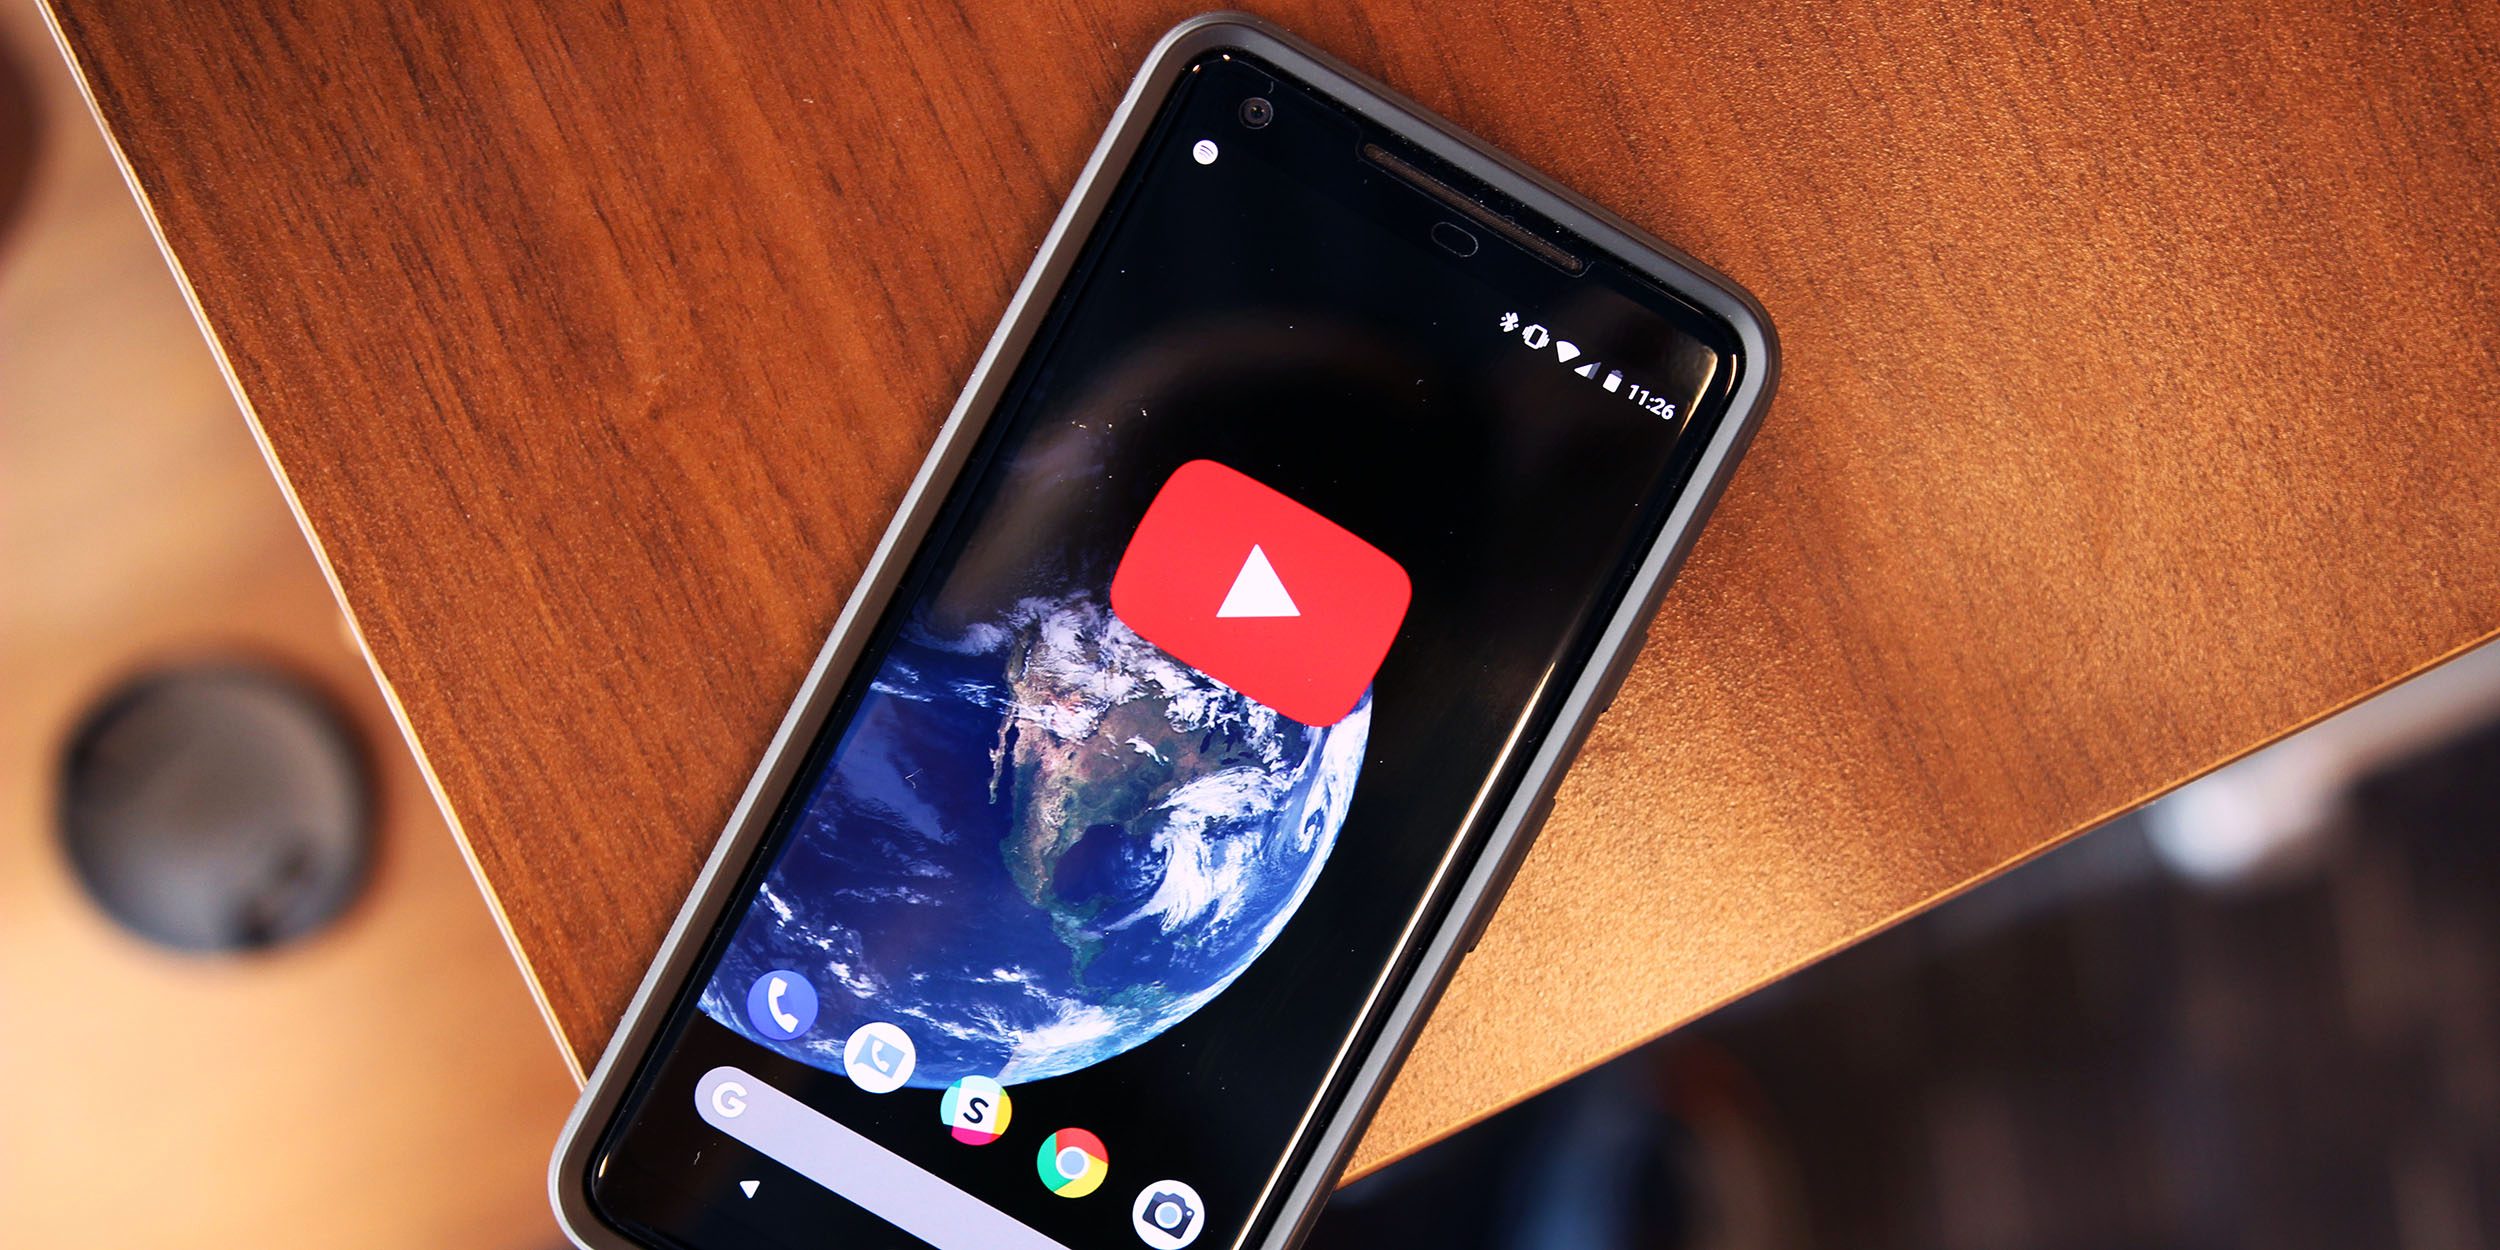 This way you can easily play YouTube videos in the background